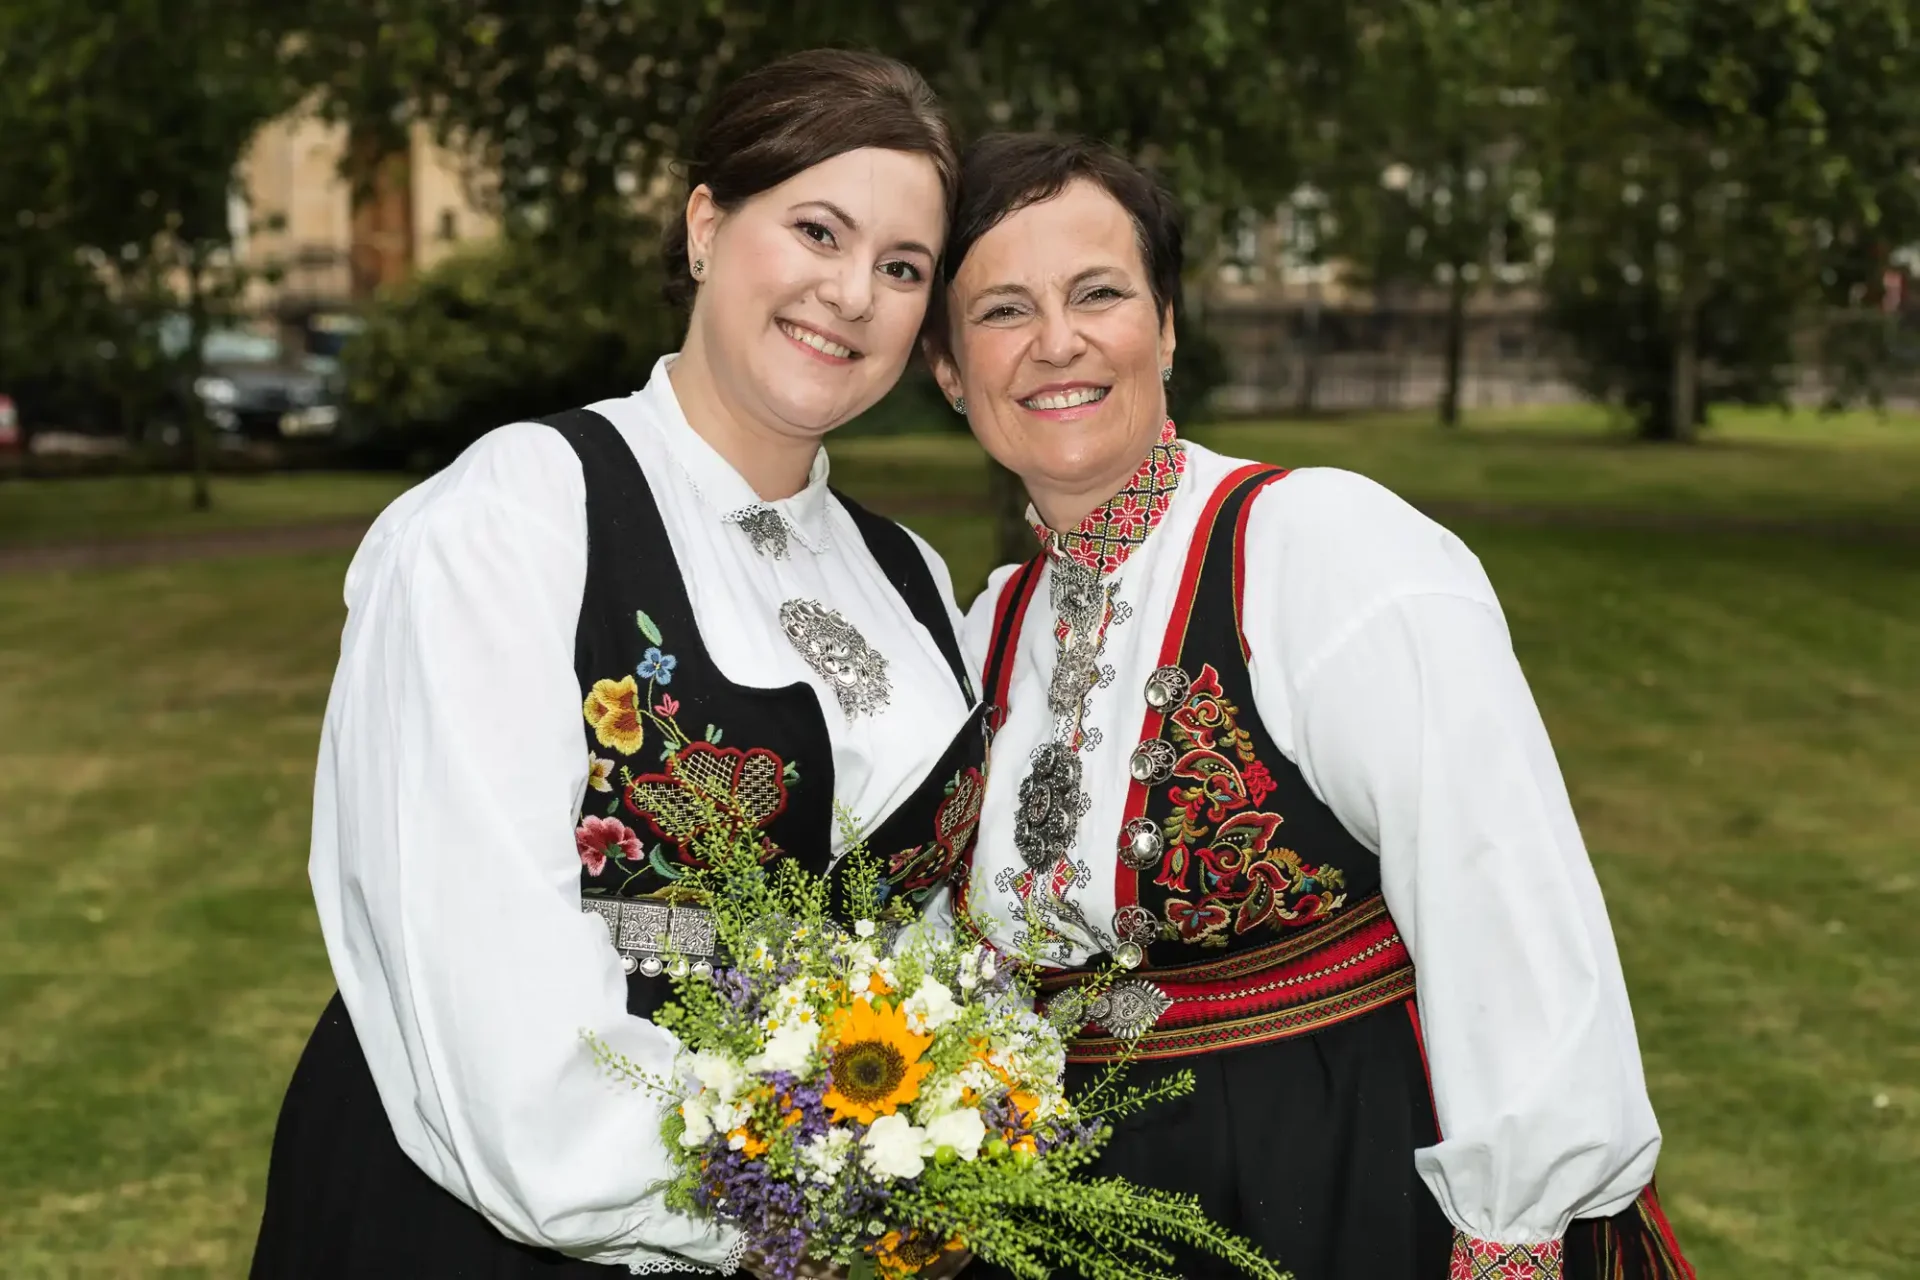 Two women in traditional norwegian dresses, holding a bouquet of wildflowers, smiling in a park.